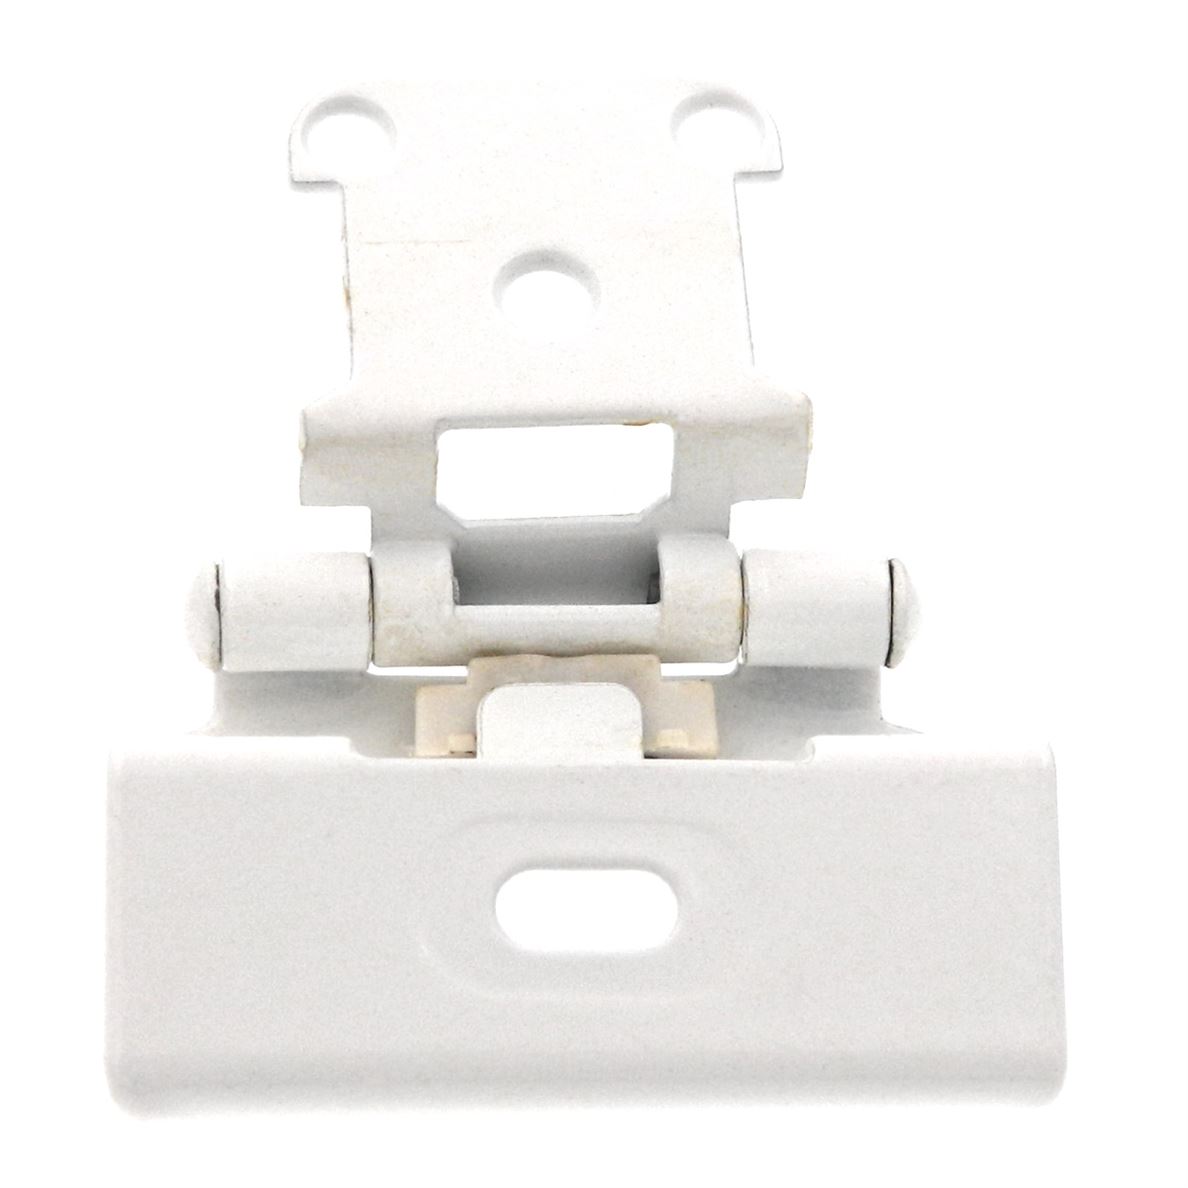 Pair Hickory Hardware White Cabinet Hinges 1/2" Overlay Full Wrap 3/4" P5710F-W2